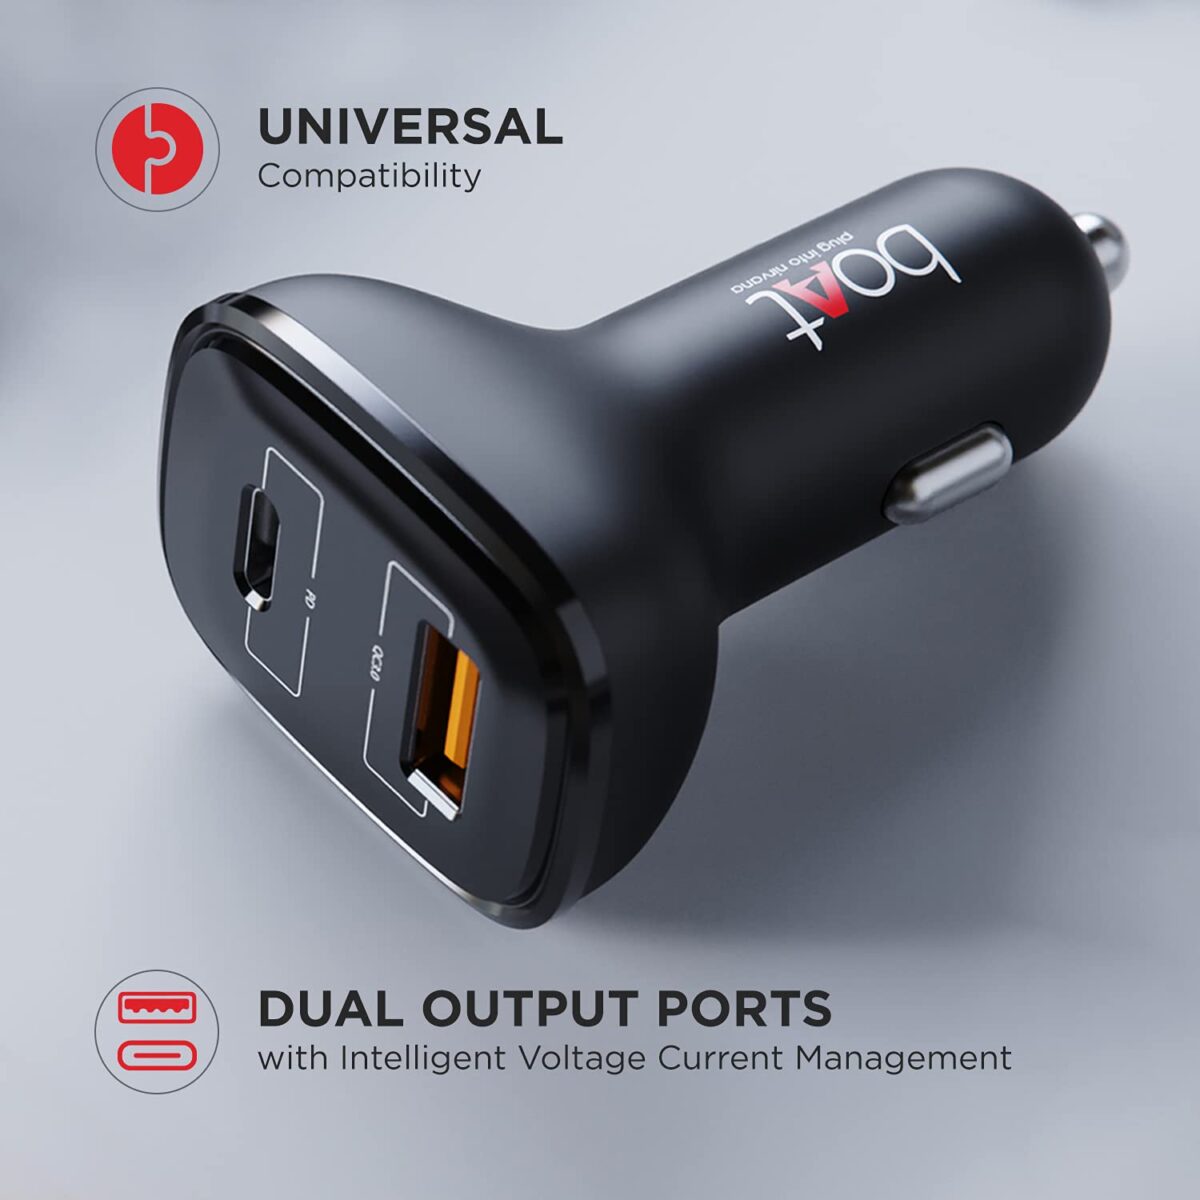 Boat dual port qc pd 24w fast car charger 4 boat dual port qc-pd 24w fast car charger